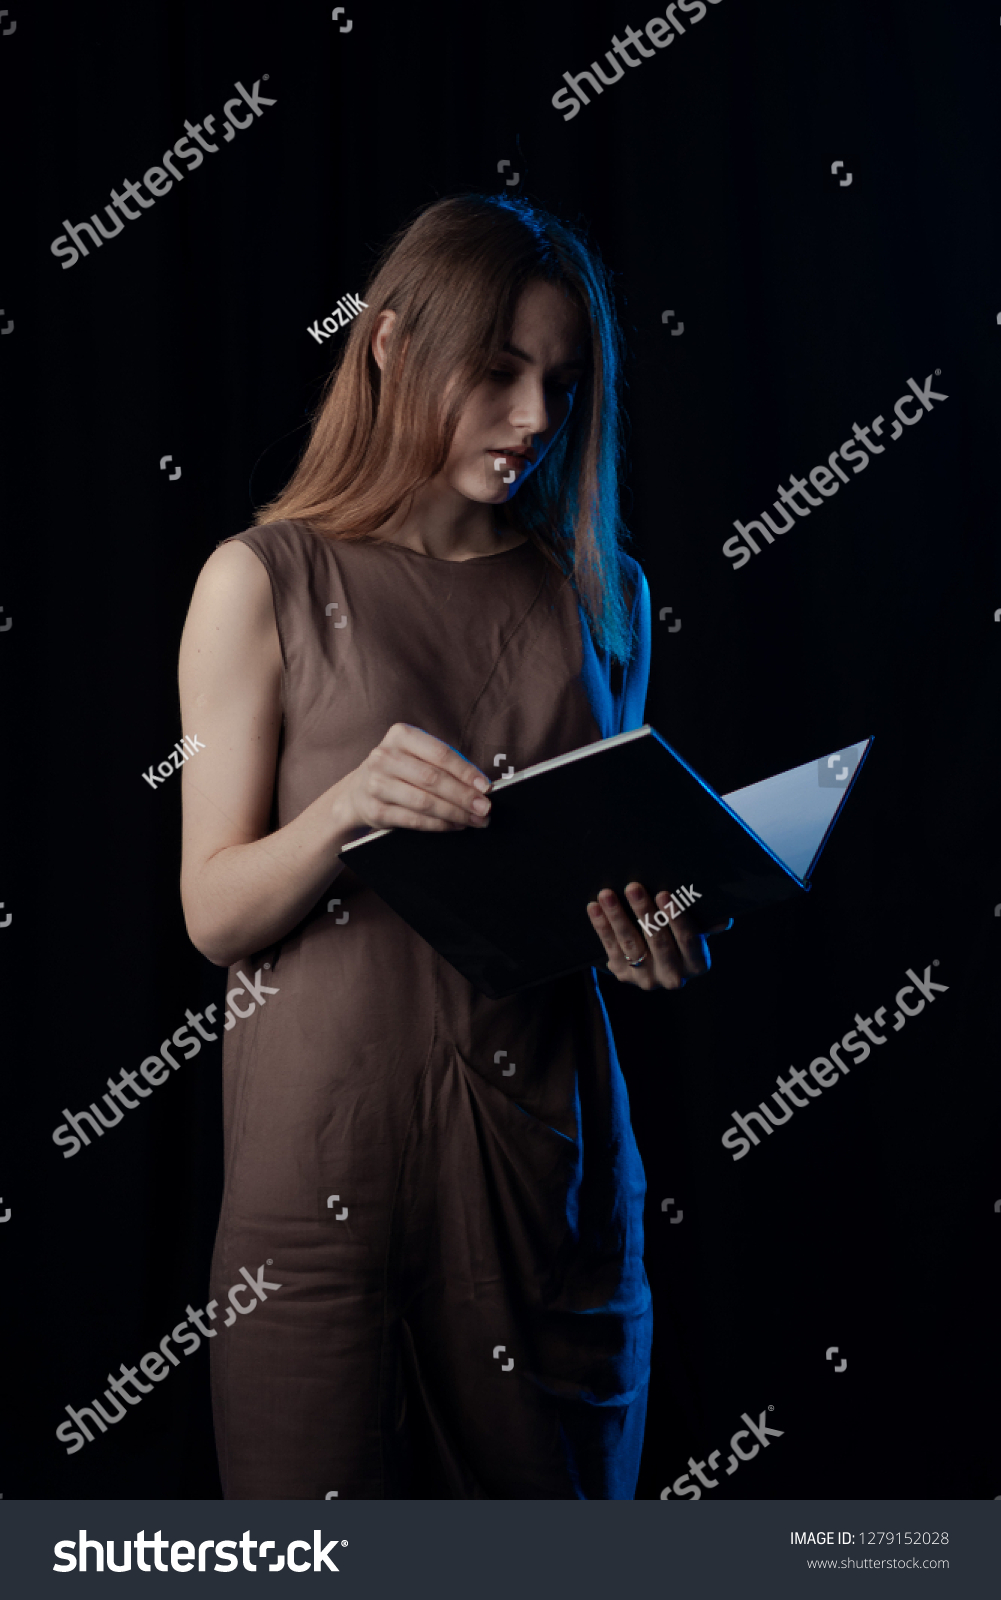 Girl Actress on stage plays emotions in blue theatrical light #1279152028